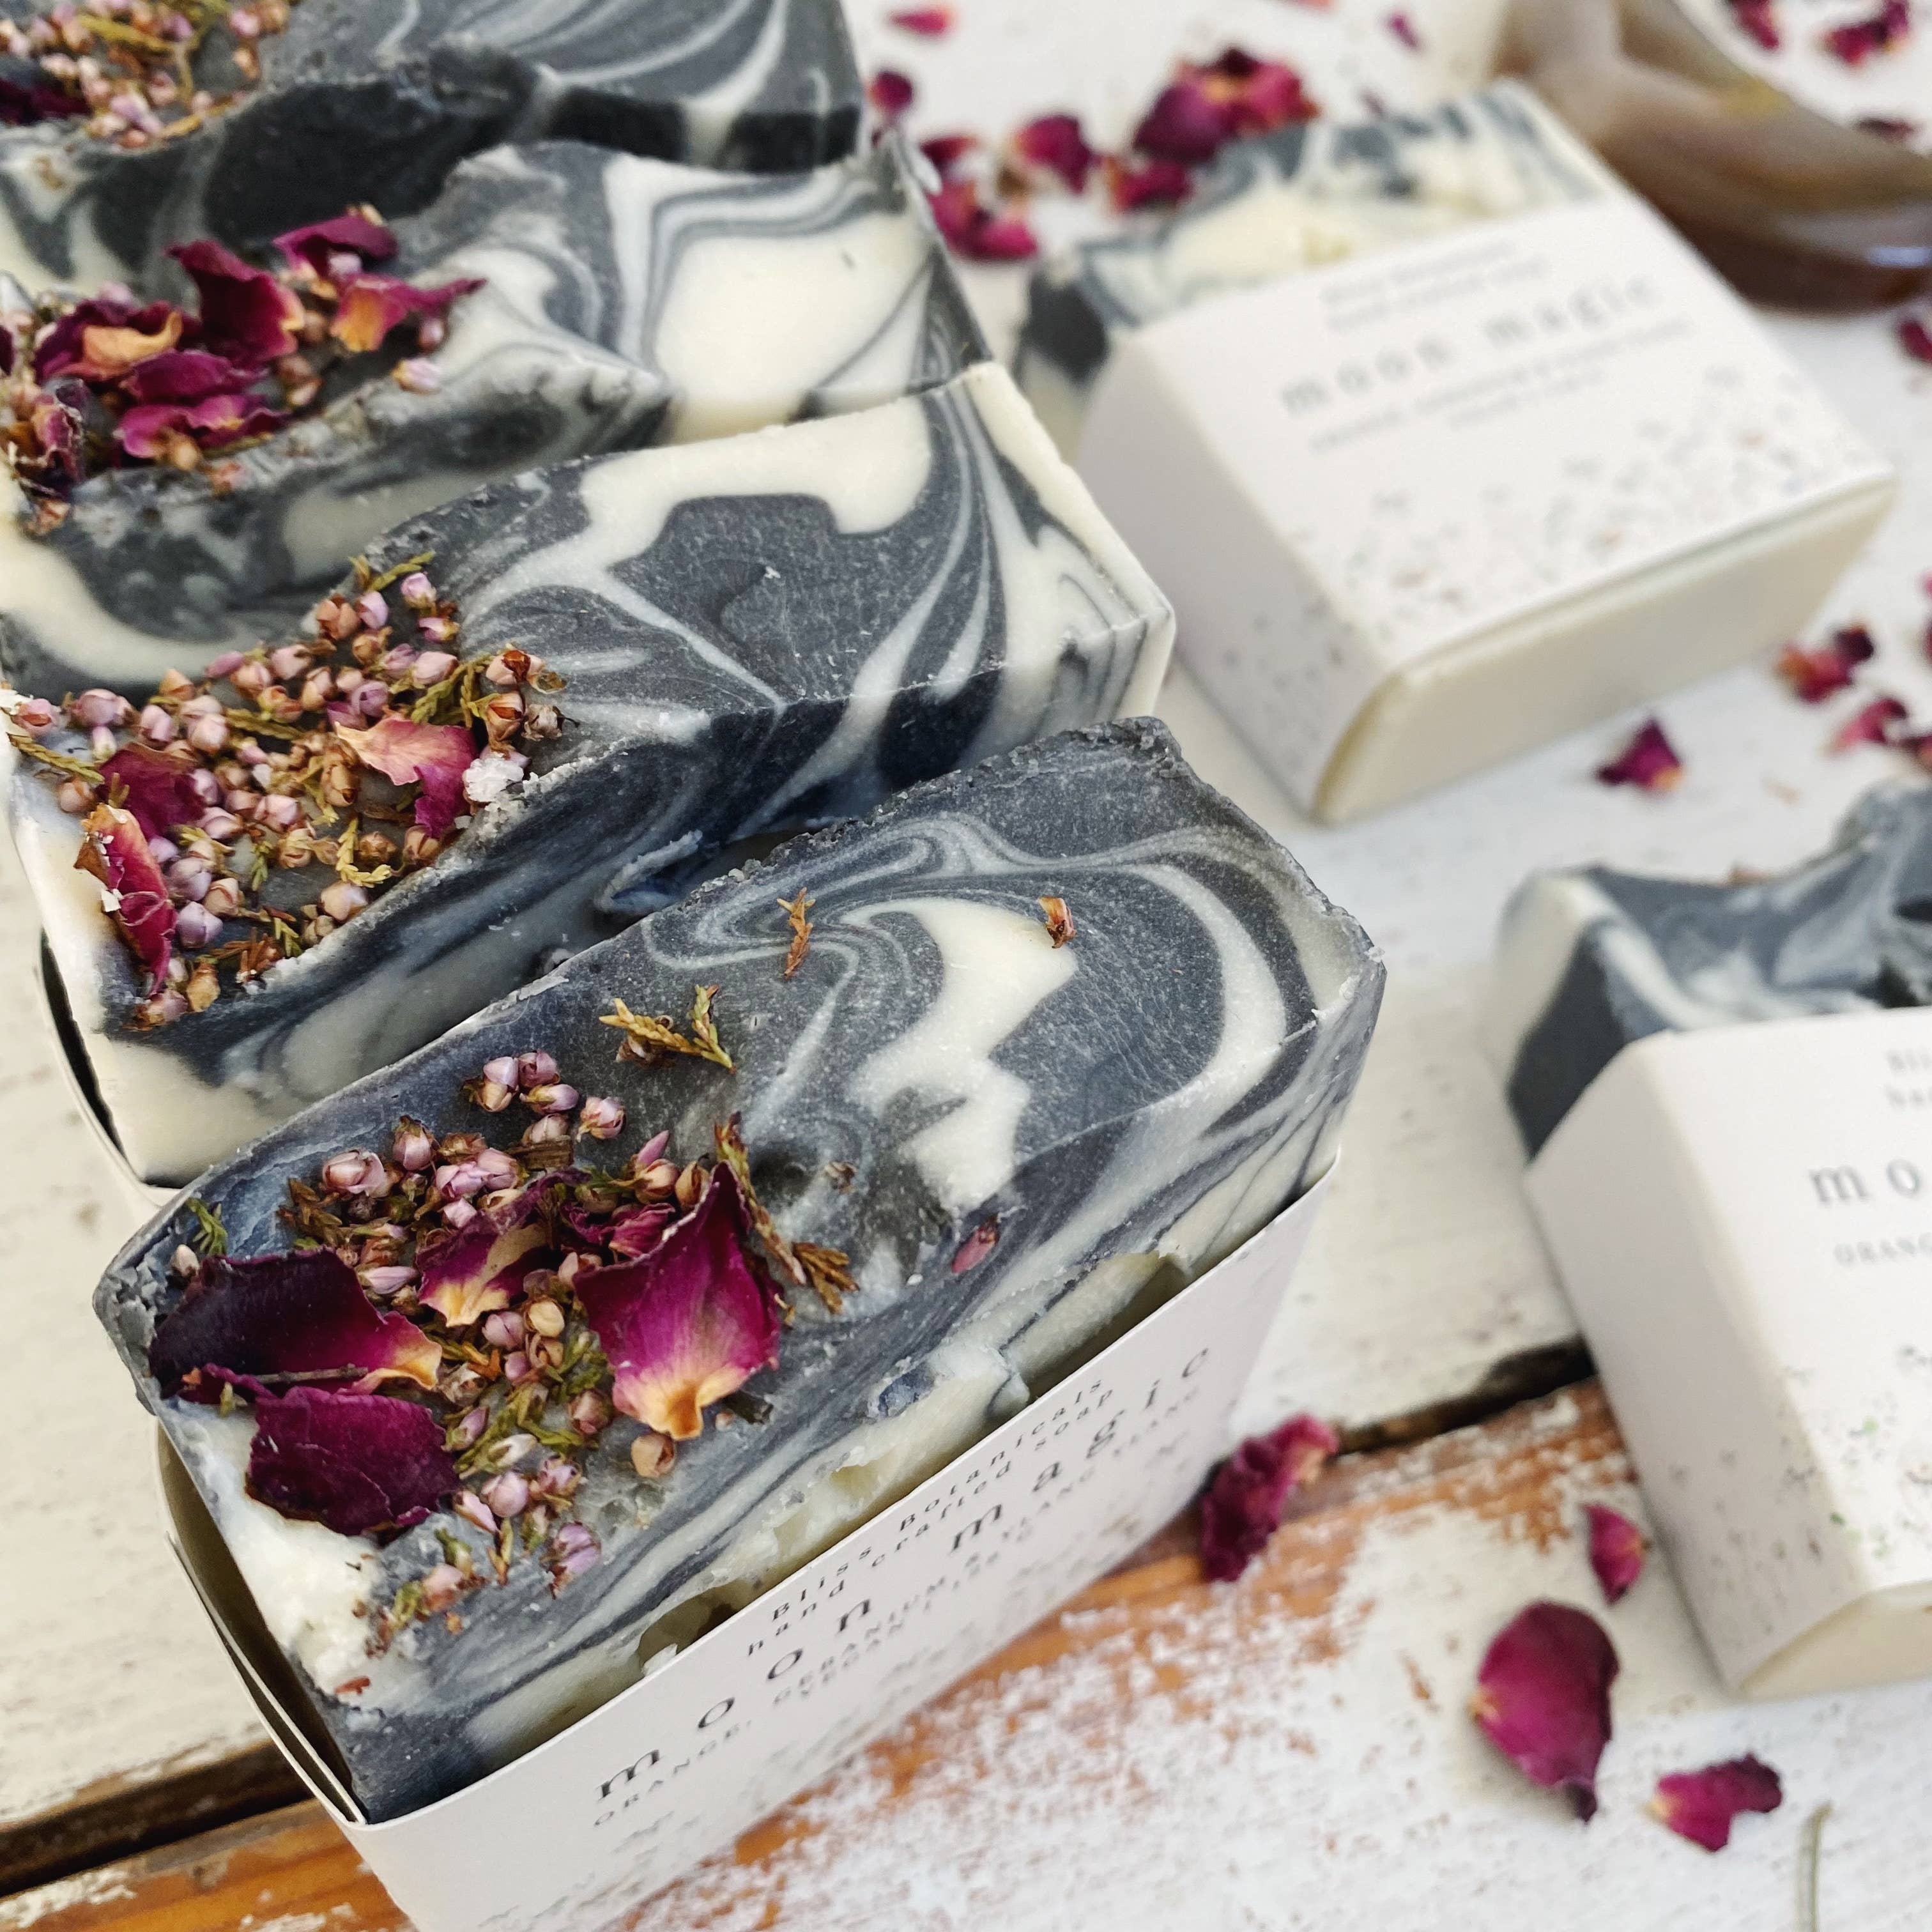 Moon Magic Soap bars with marbled patterns alongside dried rose petals, crystals, and a crescent moon dish on a rustic white wooden surface, infused with wild nurturer aromatherapy essential oils. Created by Bliss Botanicals.